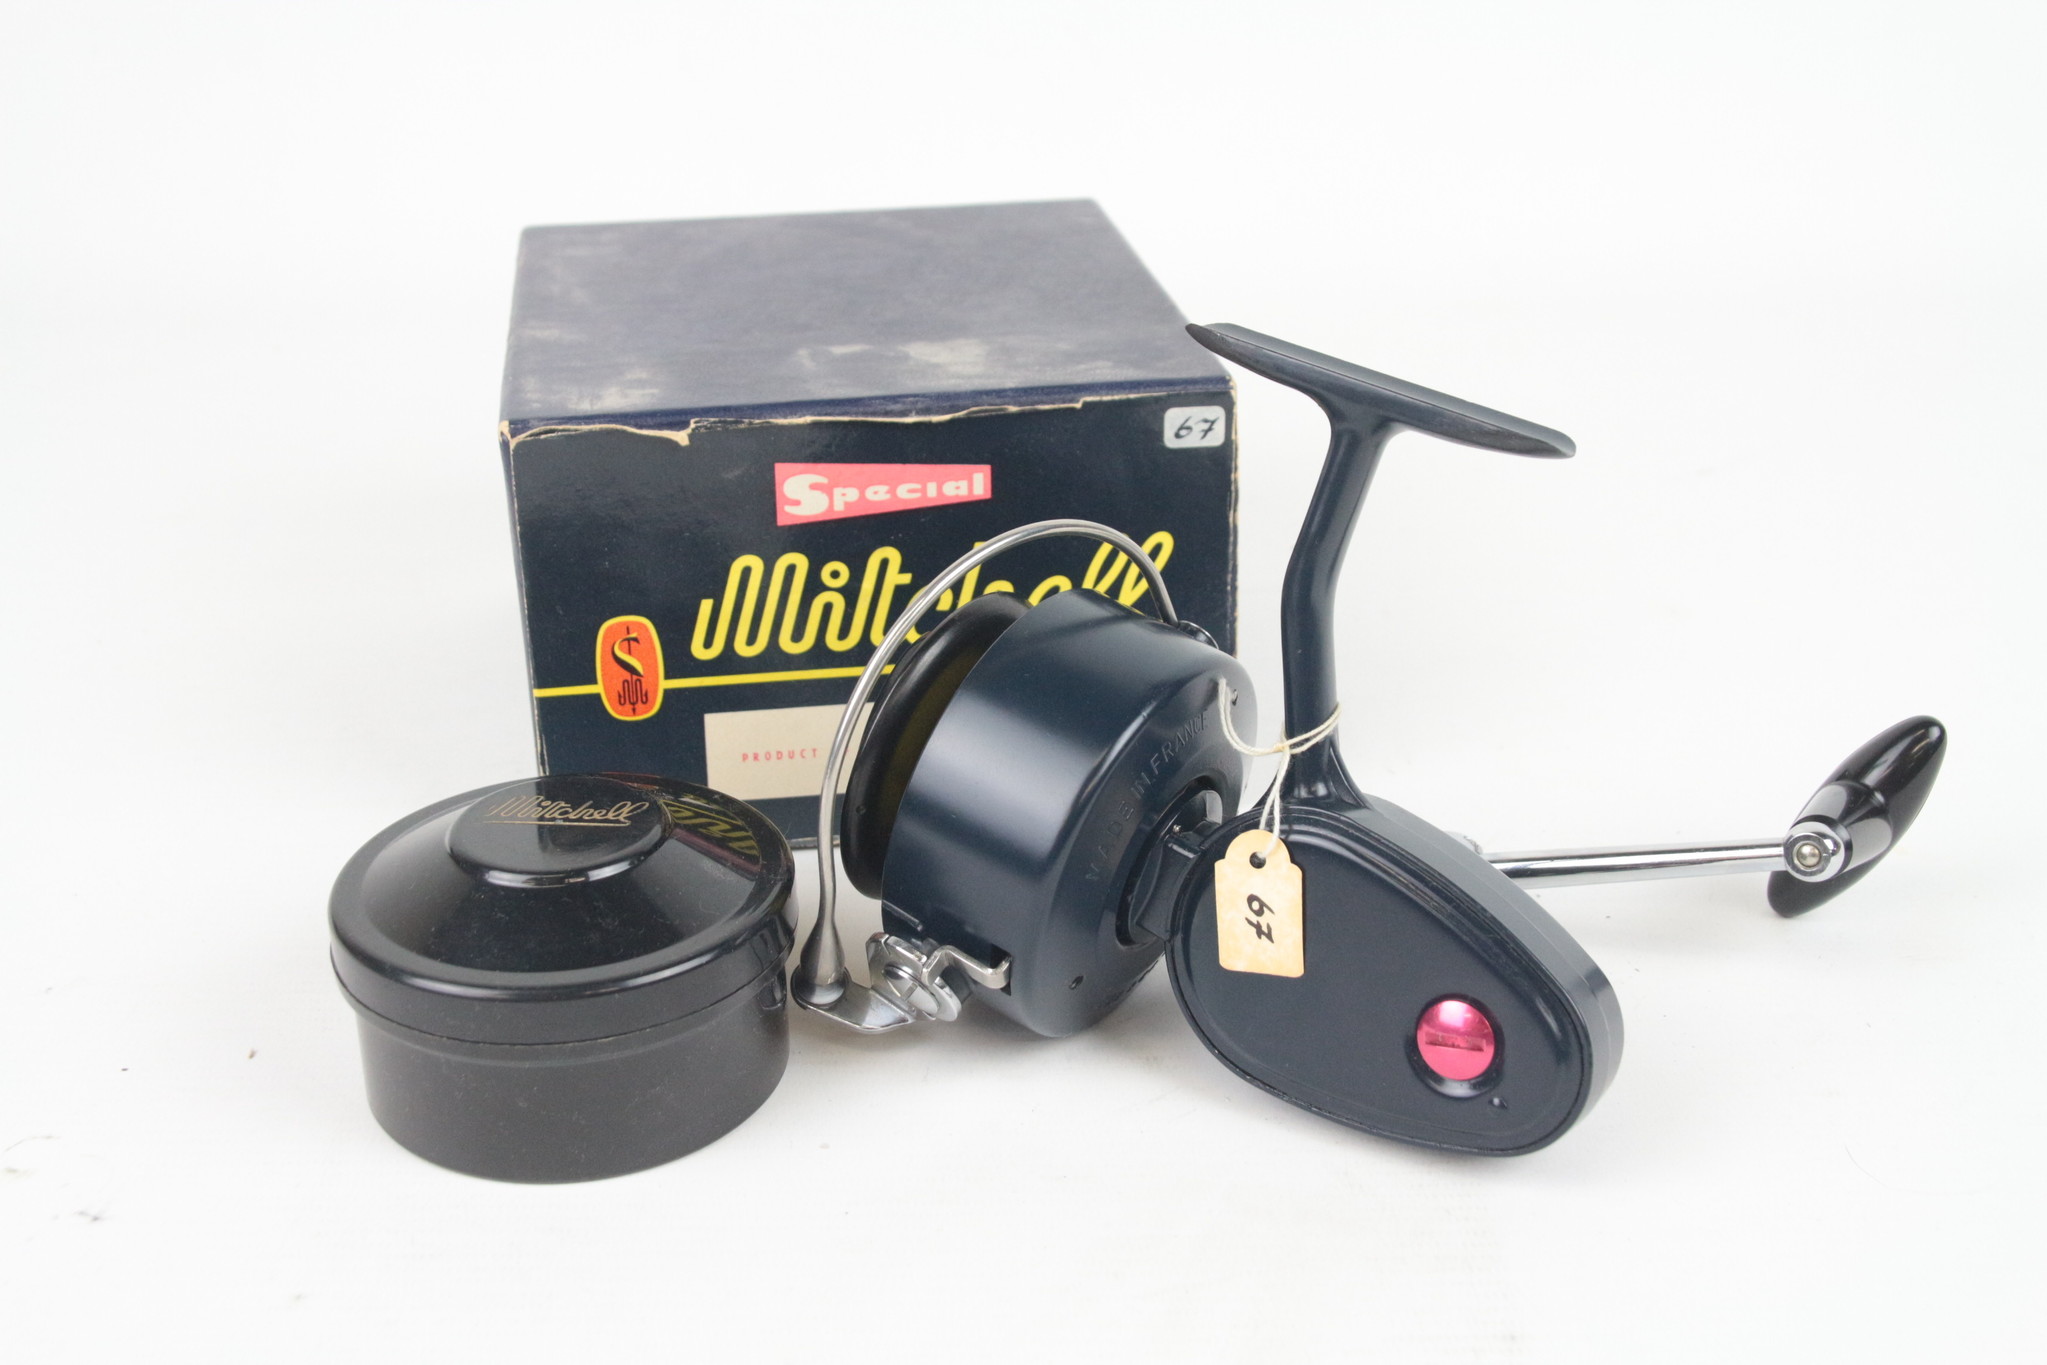 Mitchell 407 special | 0973326 | new in box | spinning reel + spare sp